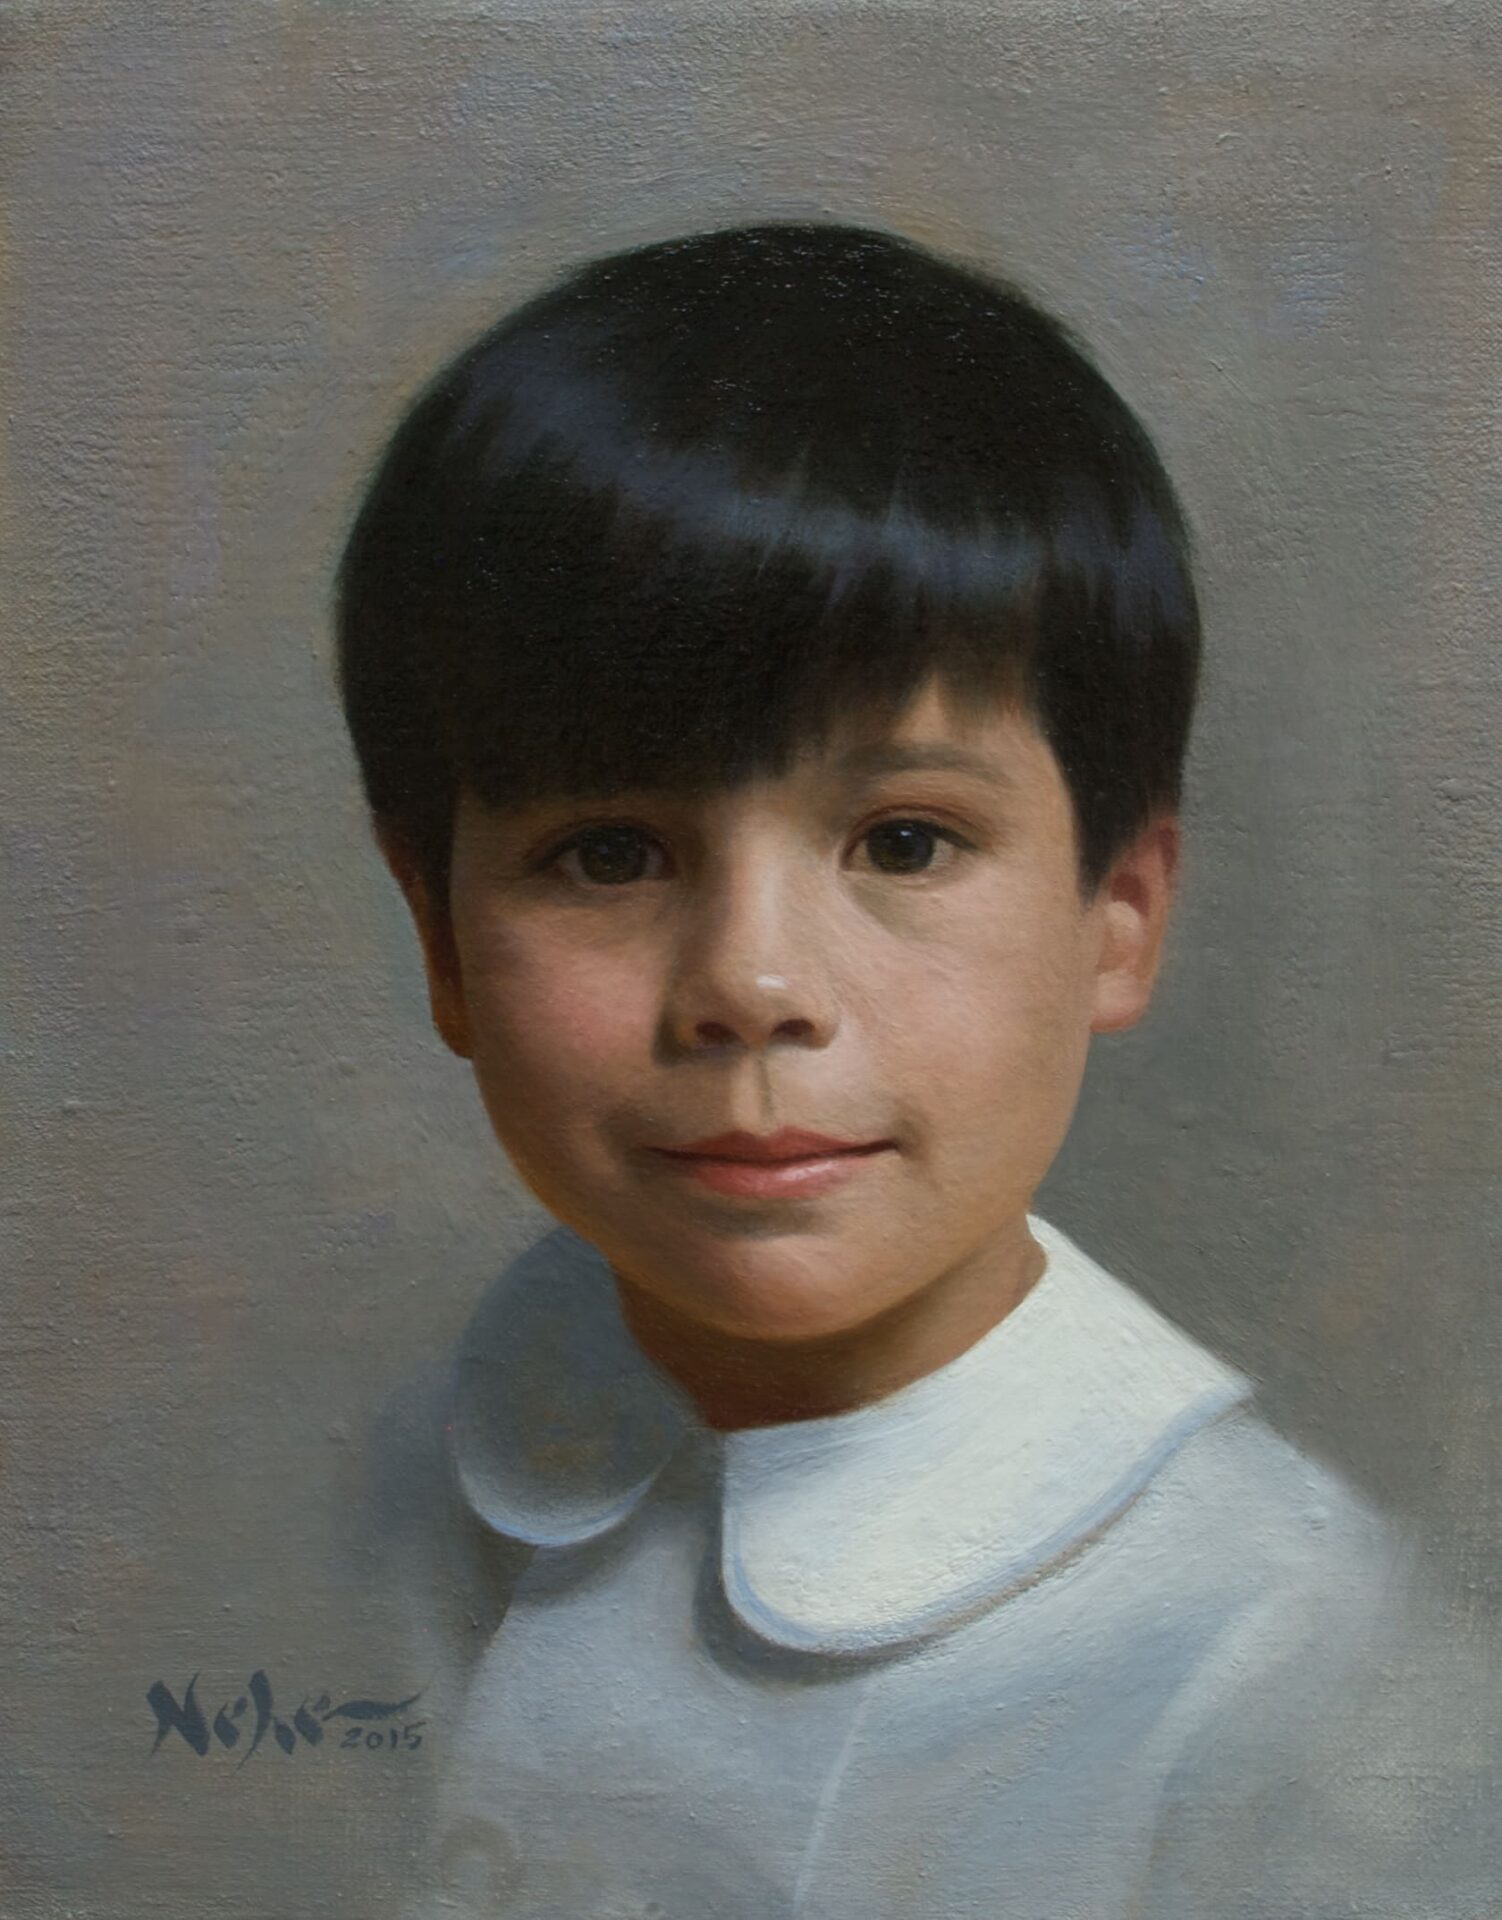 A dark-haired child’s portrait painting